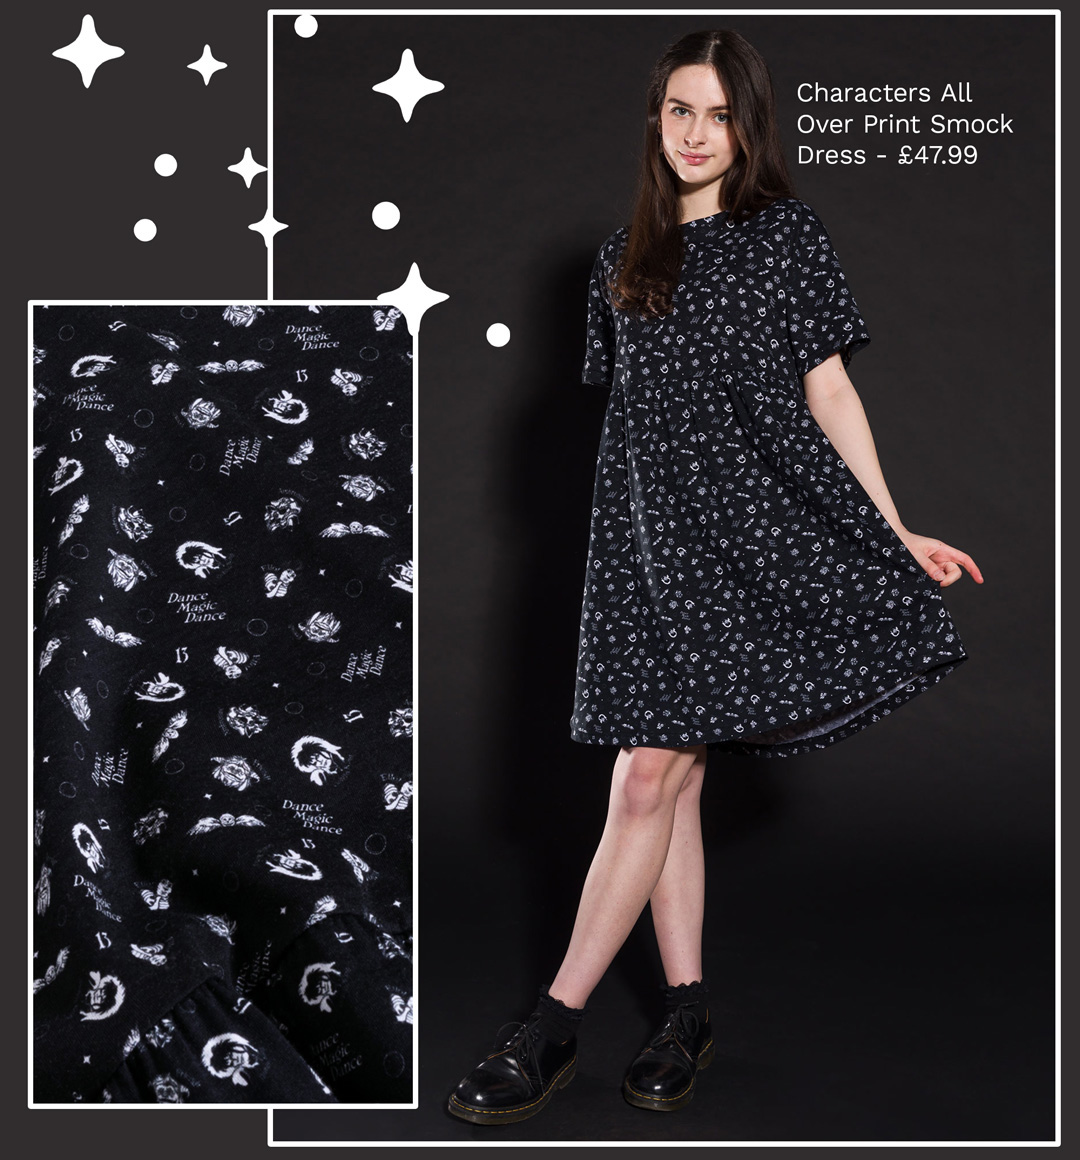 Labyrinth Characters All Over Print Smock Dress